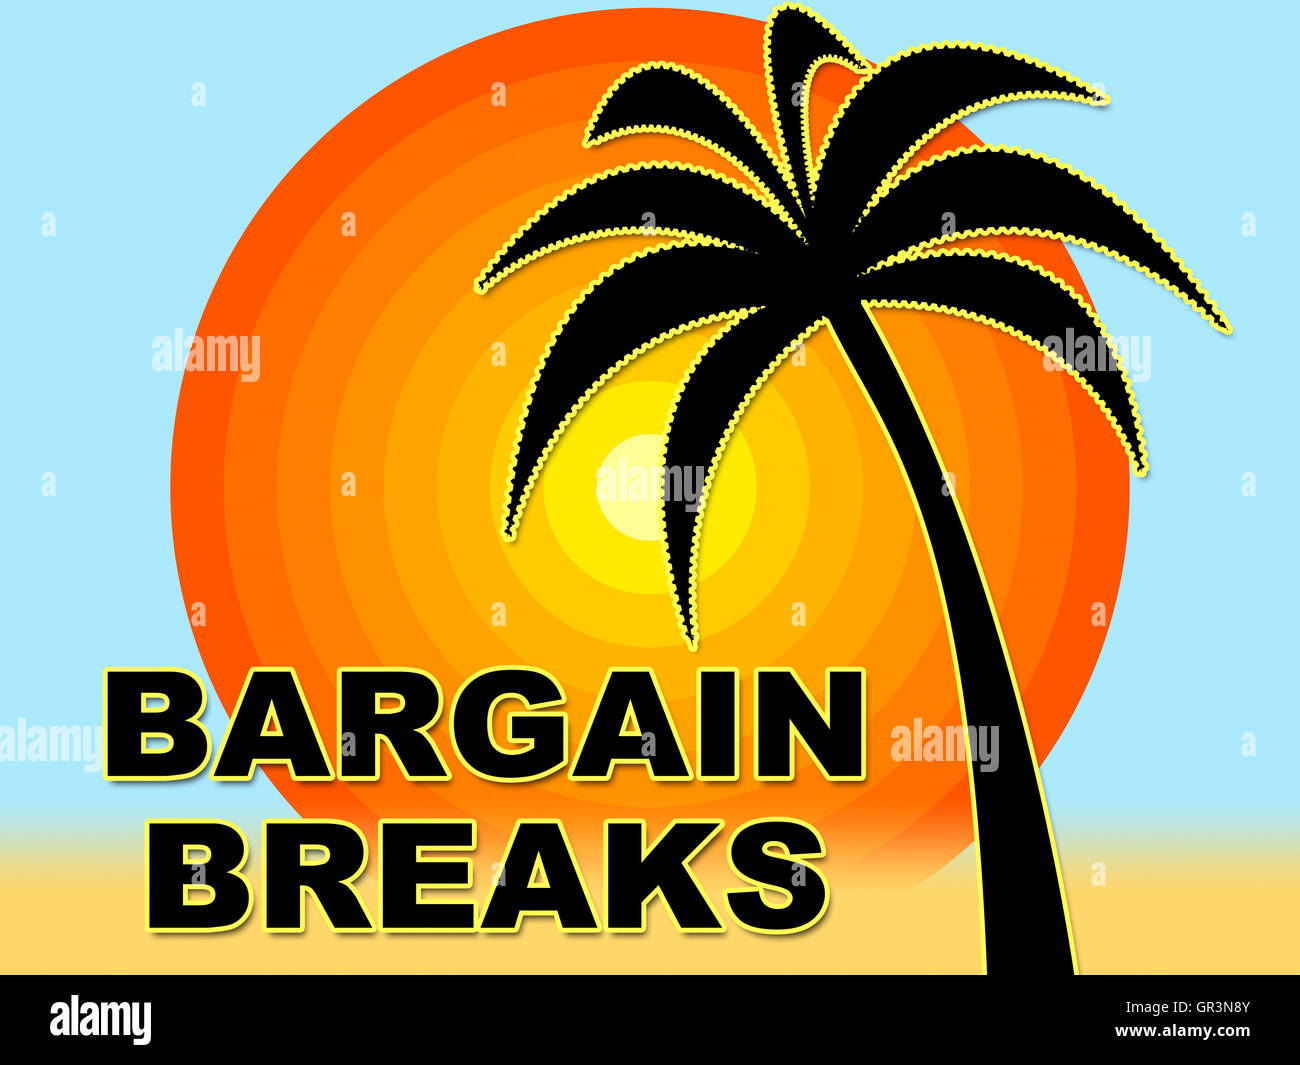 Bargain Breaks Showing Short Vacation And Discount Stock Photo